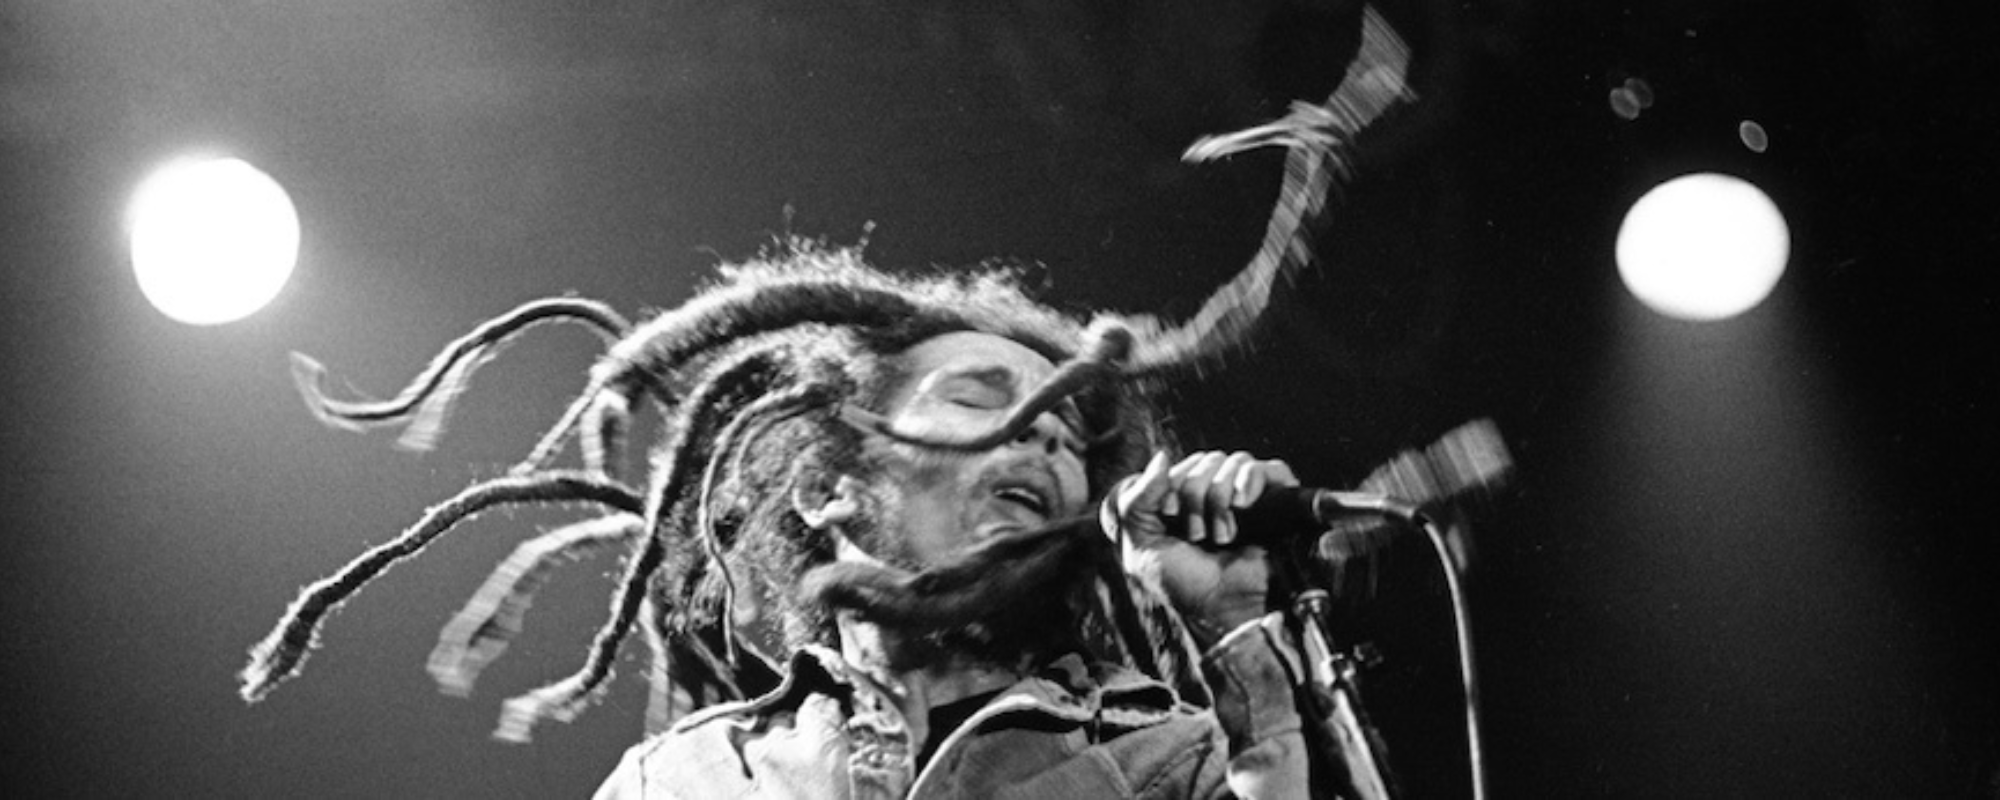 Bob Marley Photo Book Featuring Contributions from Bruce Springsteen, Patti Smith, and Others, Gets Wide Release